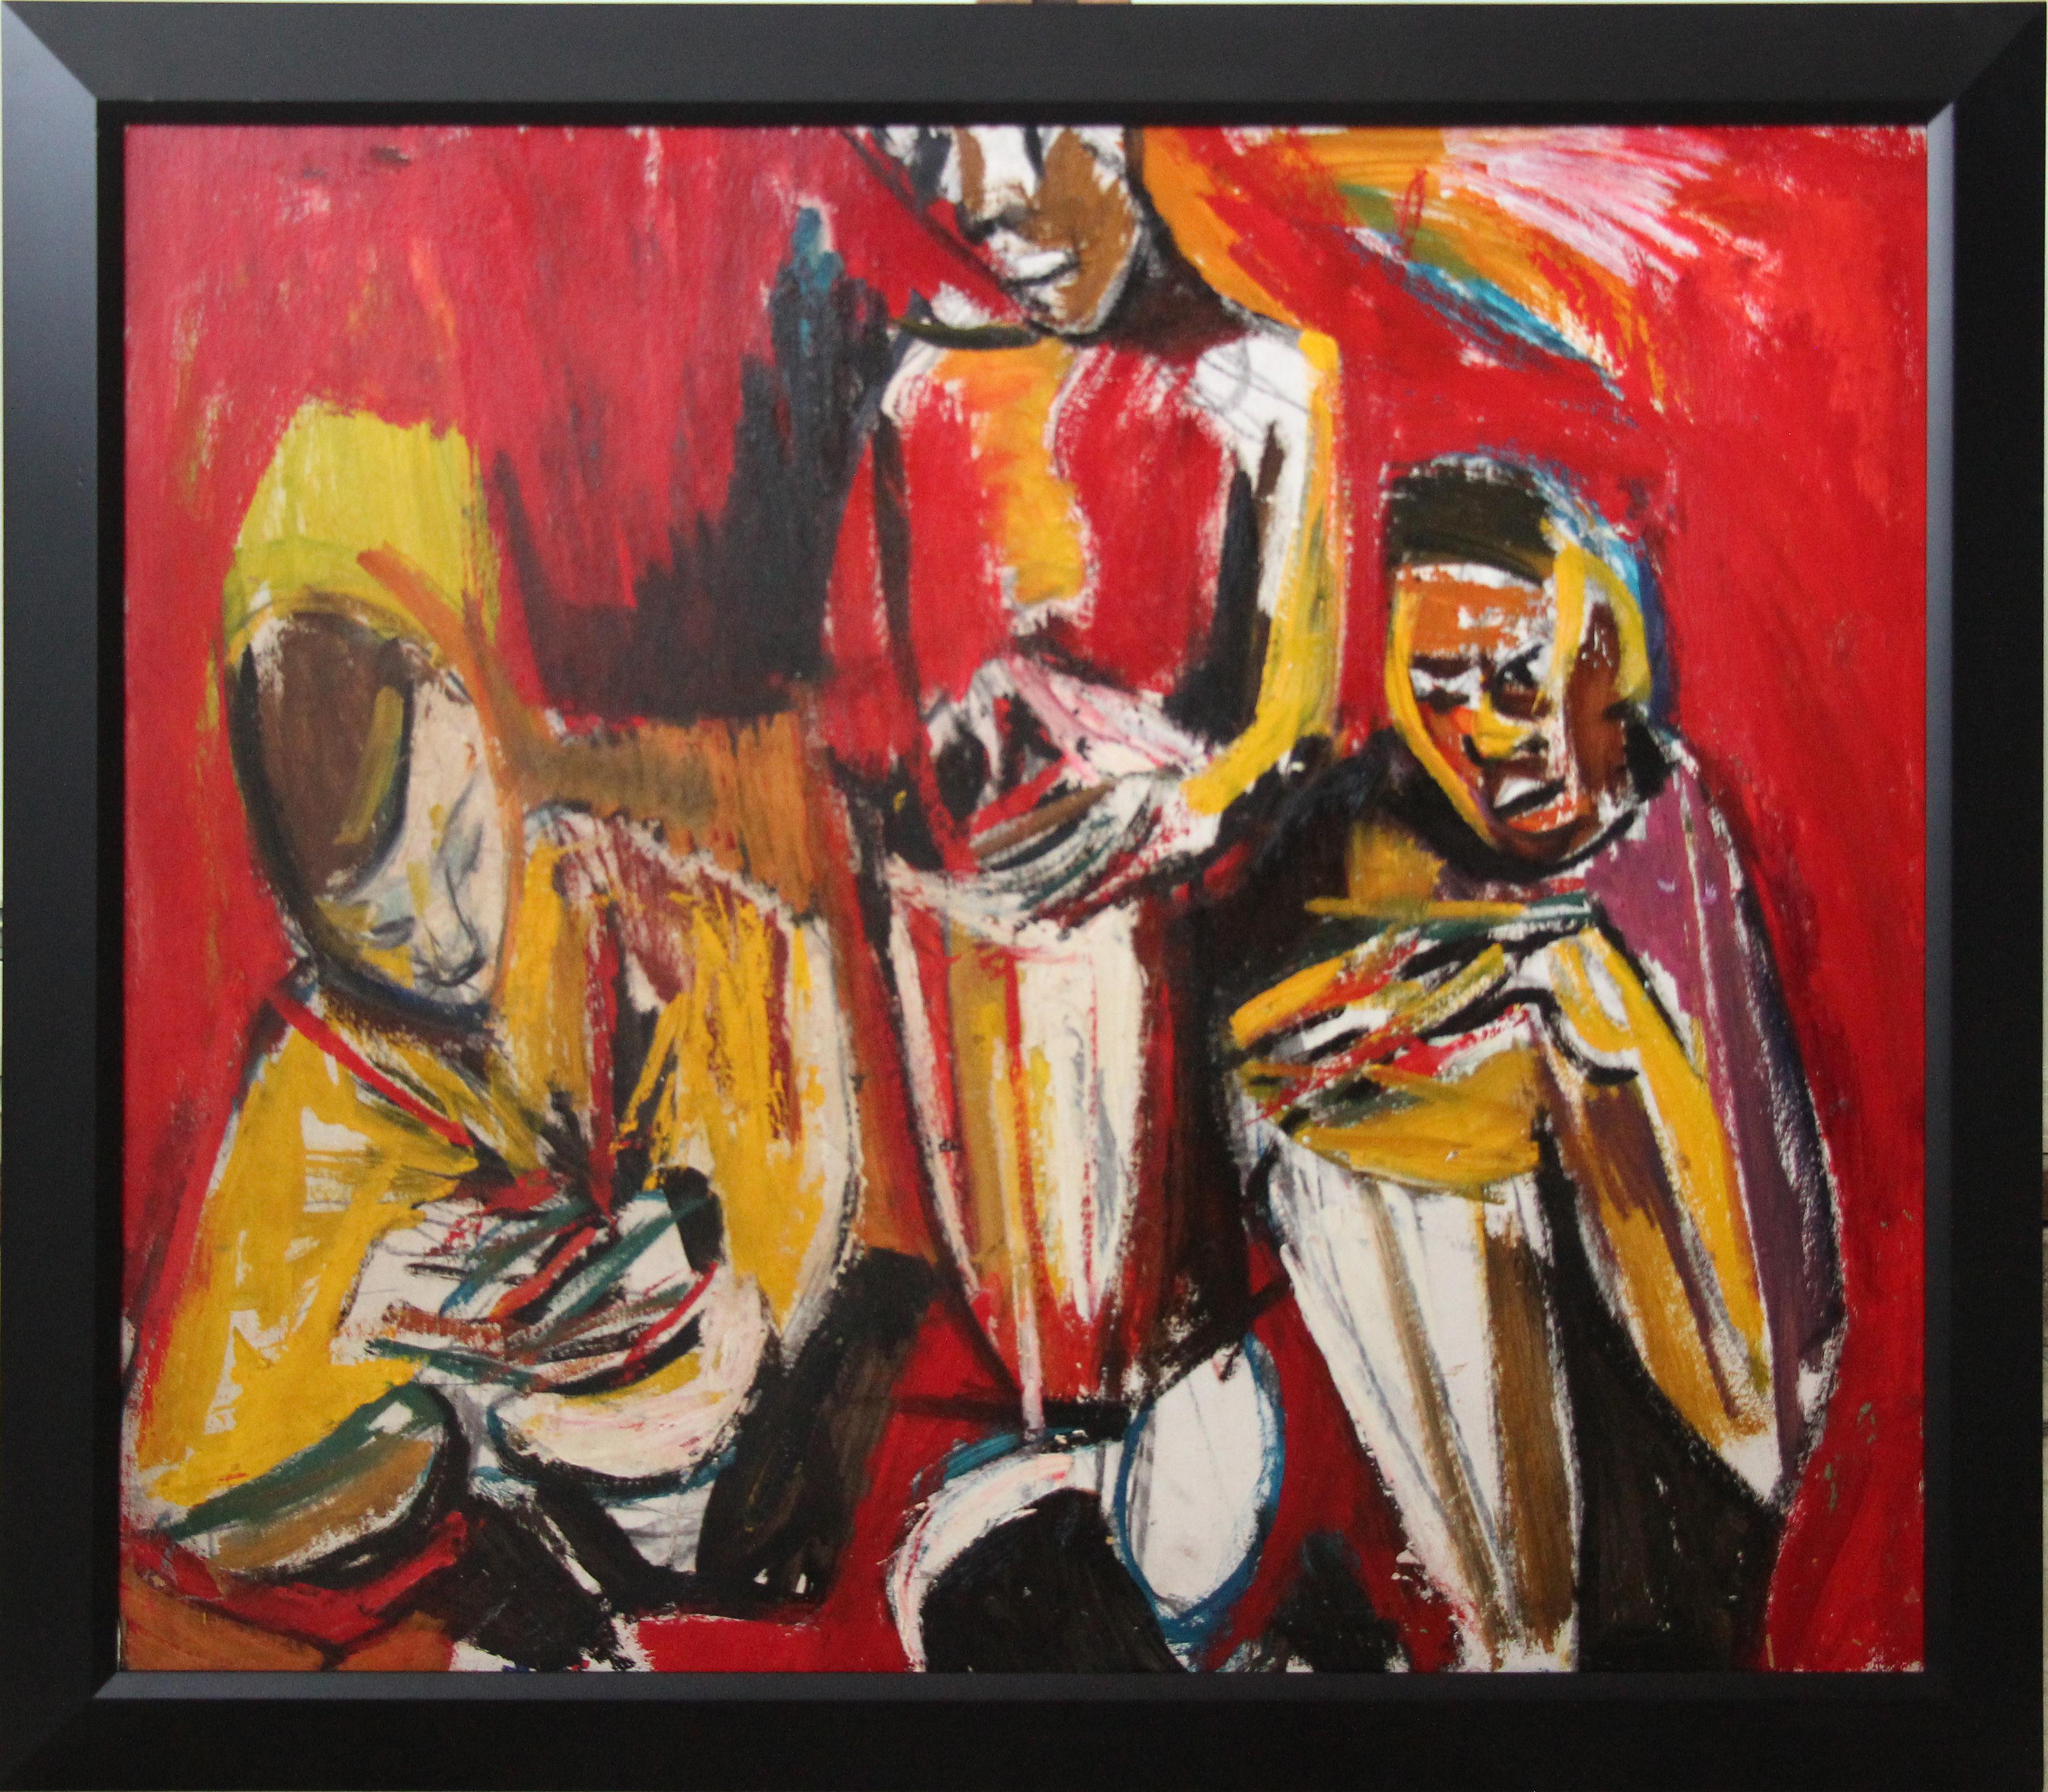 Drums, Expressionist Group Portrait of Three Musicians by Philadelphia Artist - Painting by Bernard Harmon